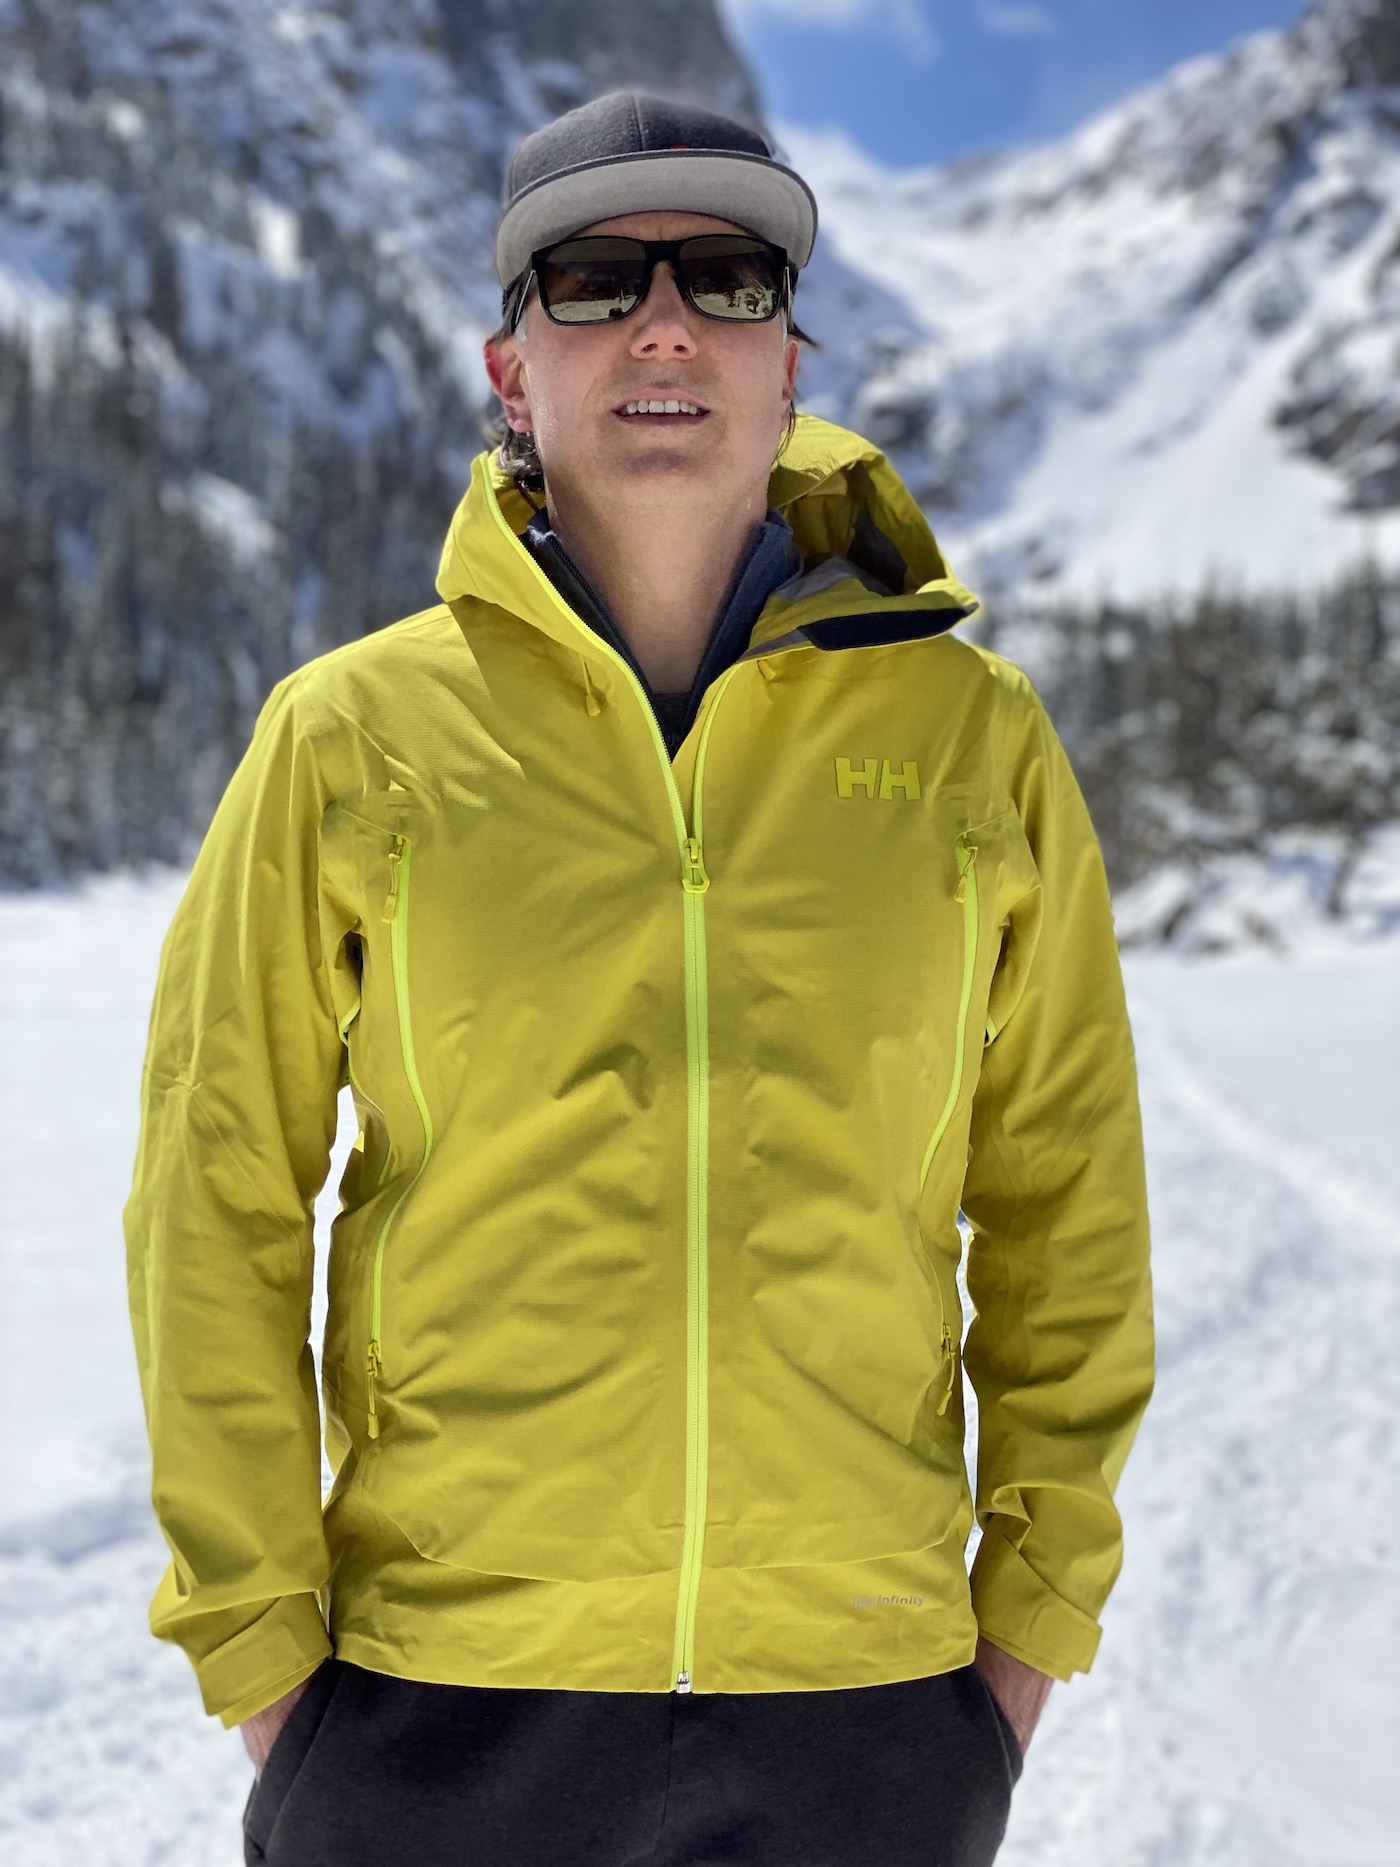 Helly Hansen Verglas Infinity Shell Jacket Review